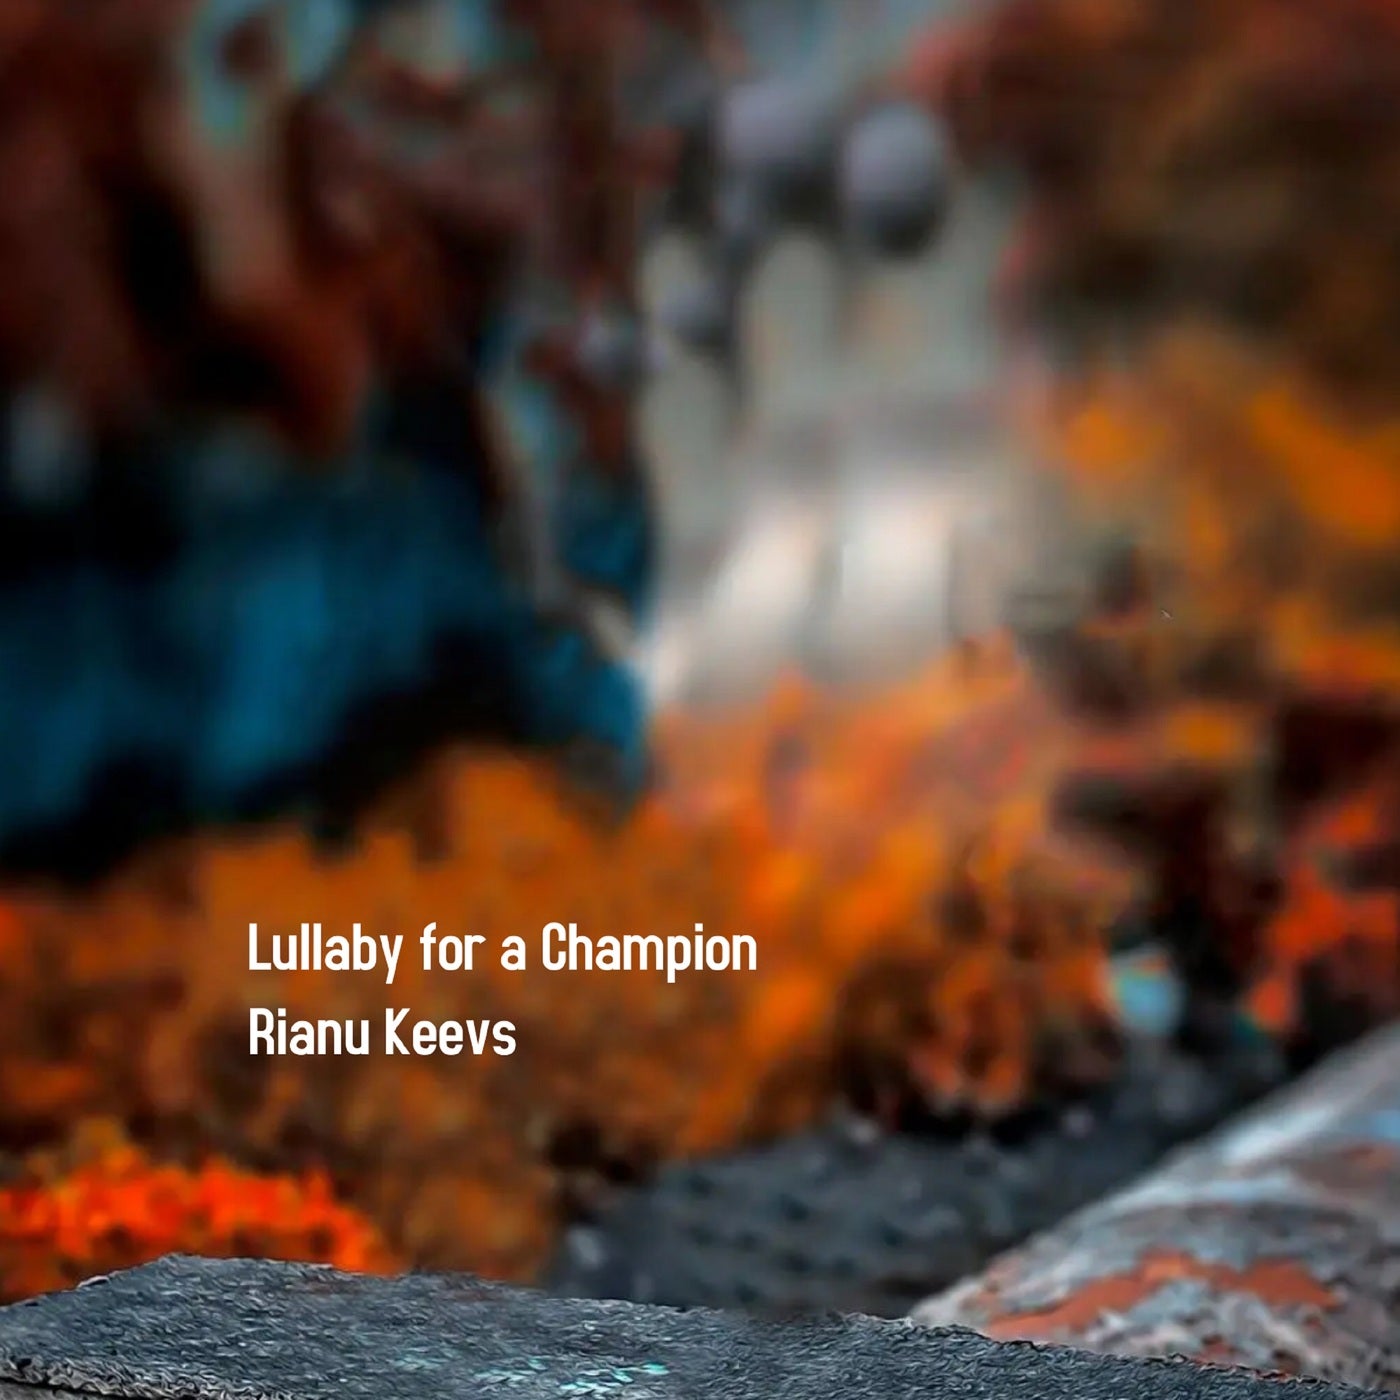 Lullaby for a Champion